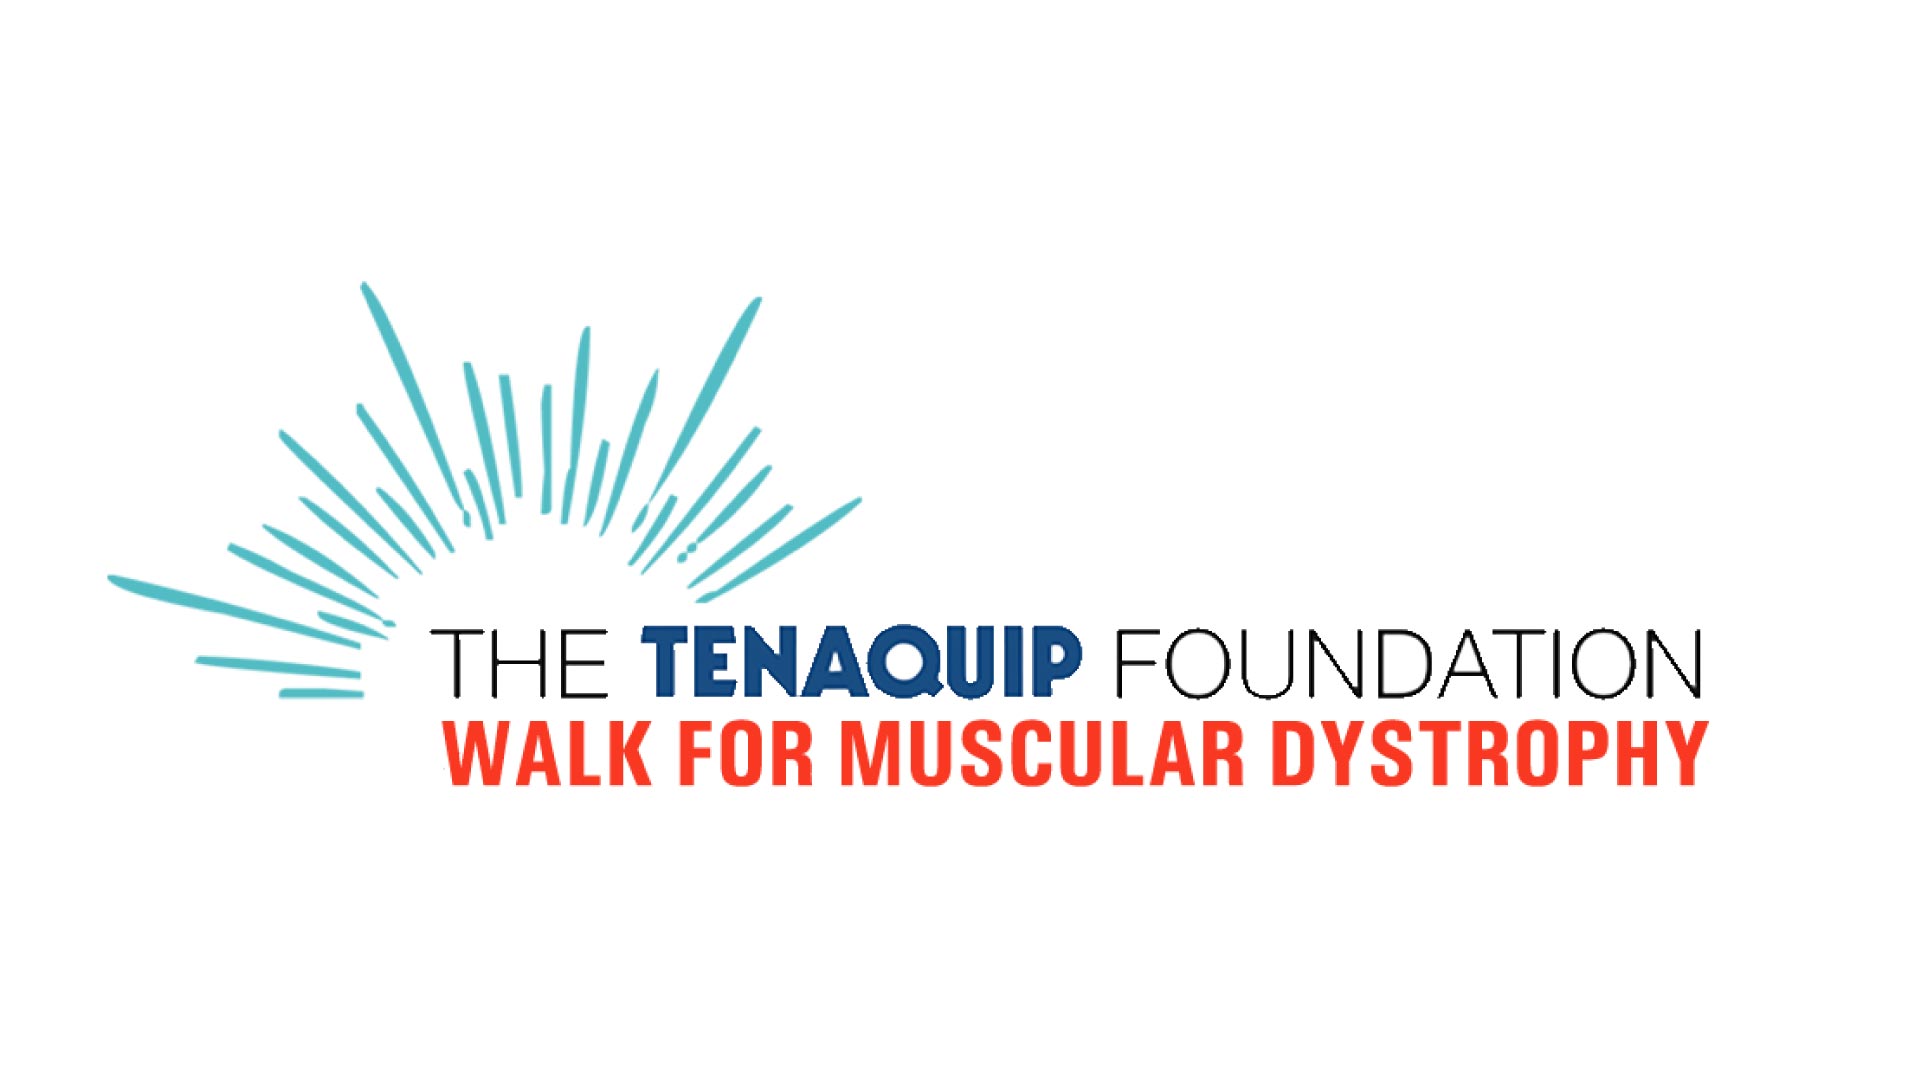 The Tenaquip Foundation Walk for Muscular Dystrophy raising funds, hope and unity in new ways